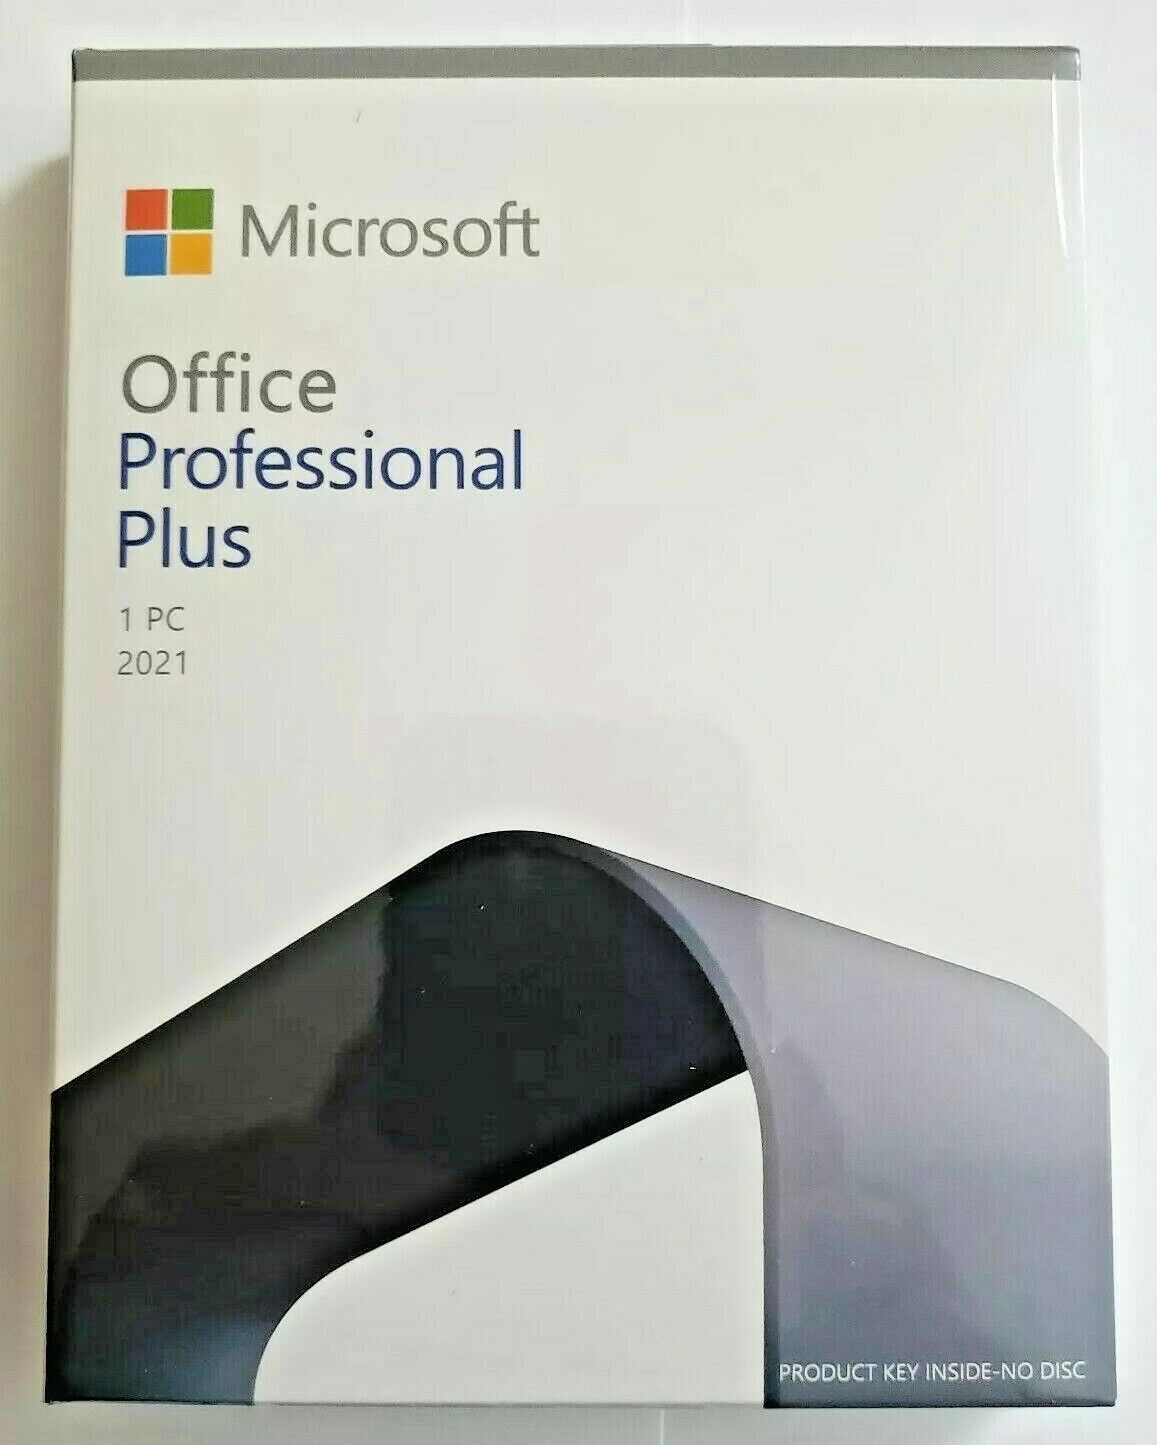 Can I Purchase Microsoft Office Professional Plus 2021 On EBay